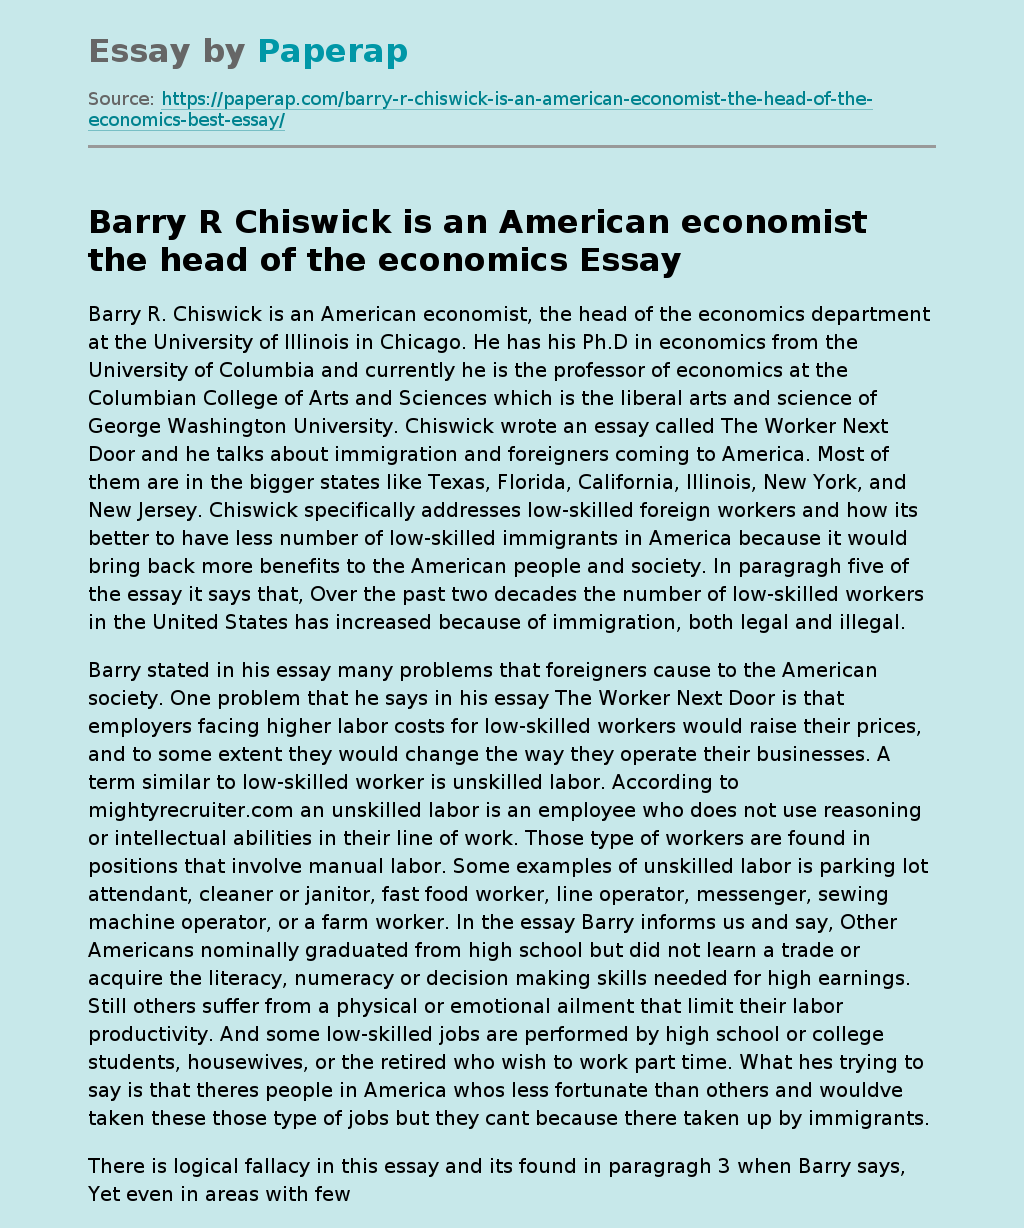 Barry R Chiswick is an American economist